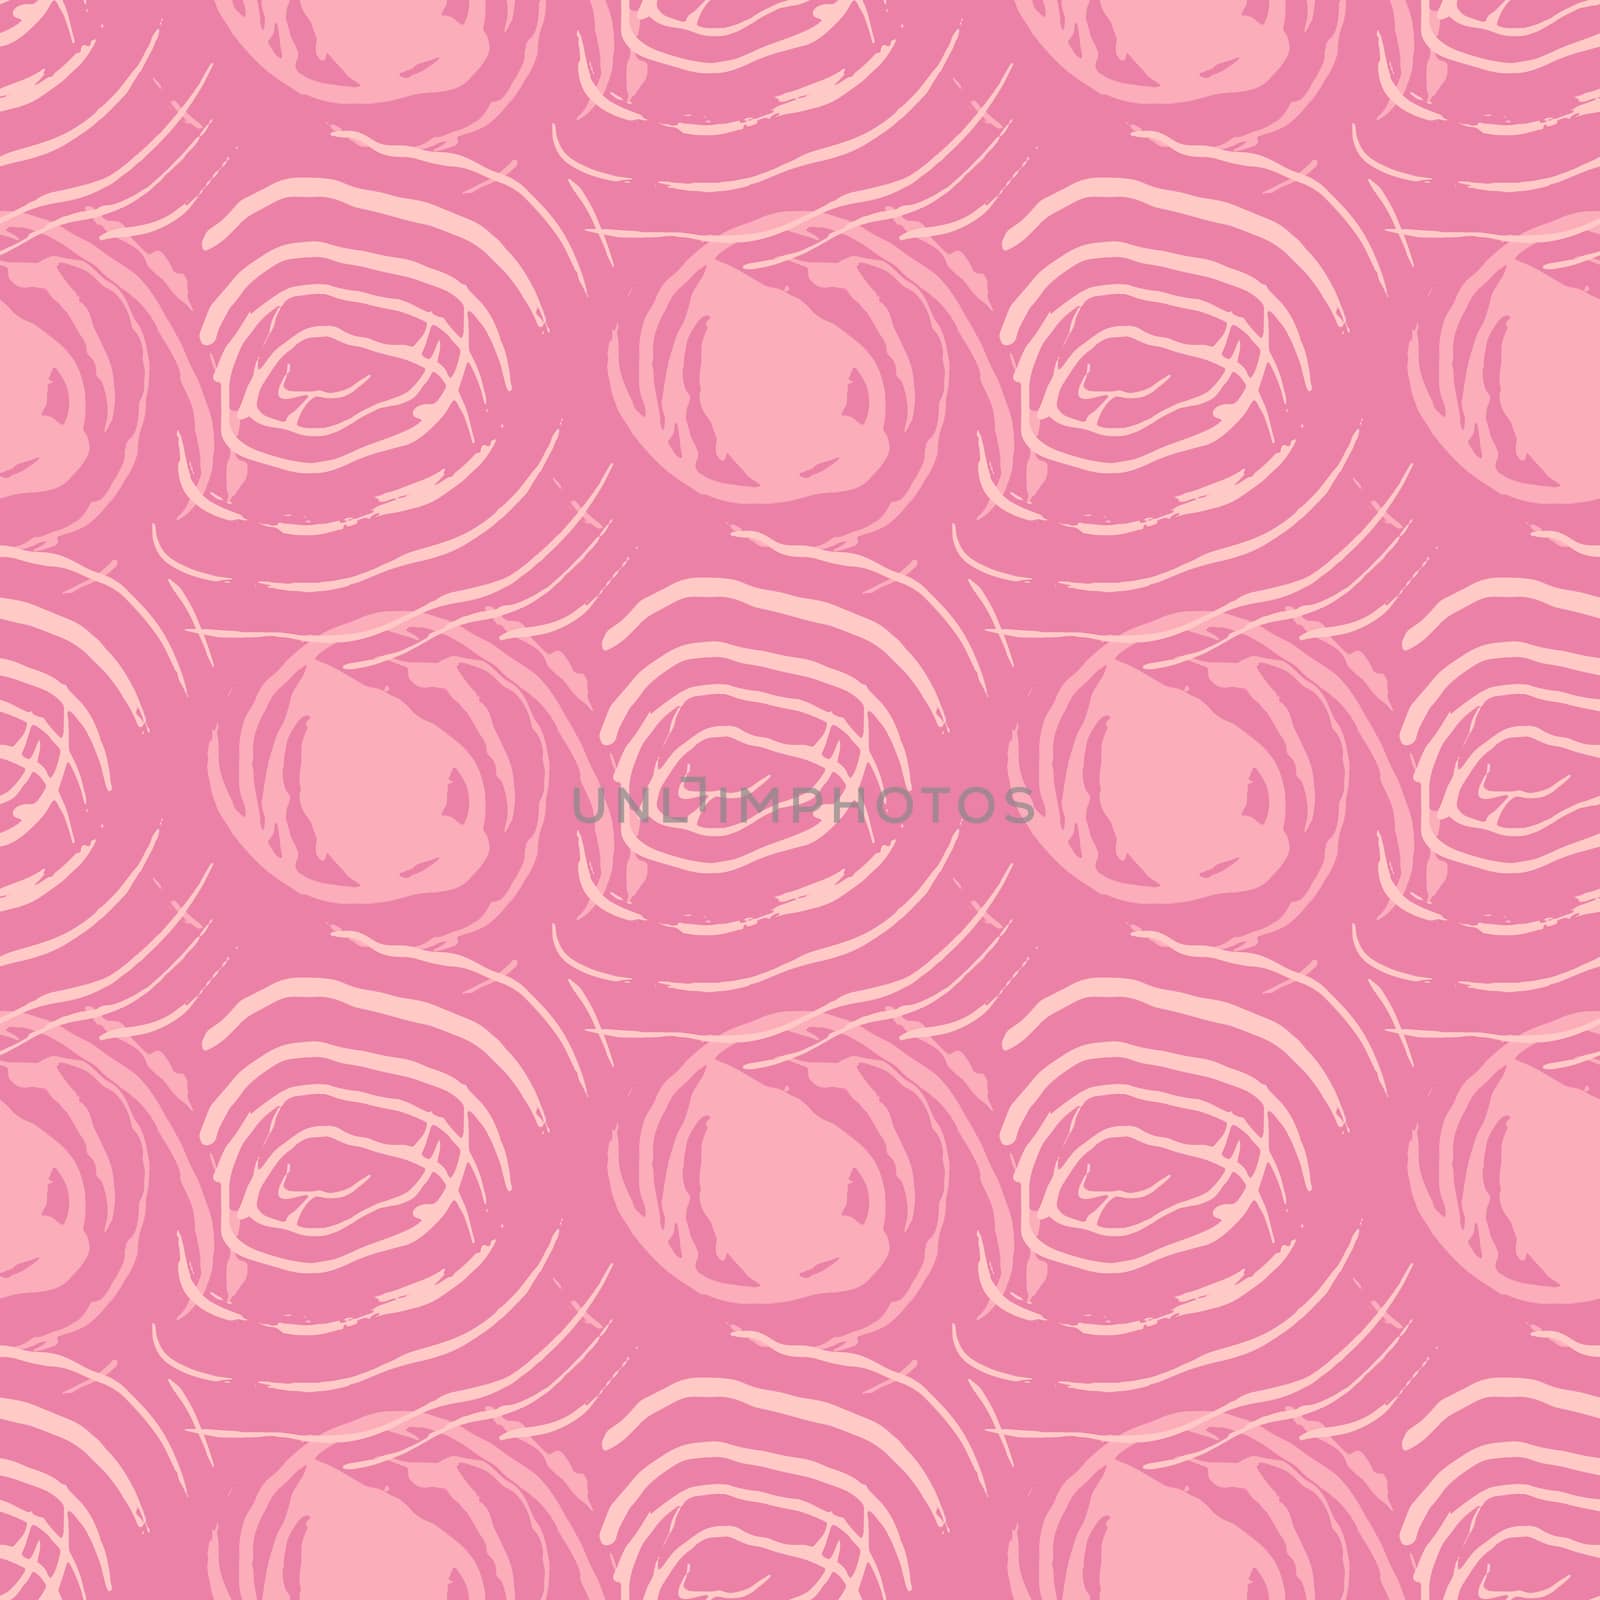 Pink abstract rose floral seamless pattern with hand drawn texture pastel romantic background. by Nata_Prando